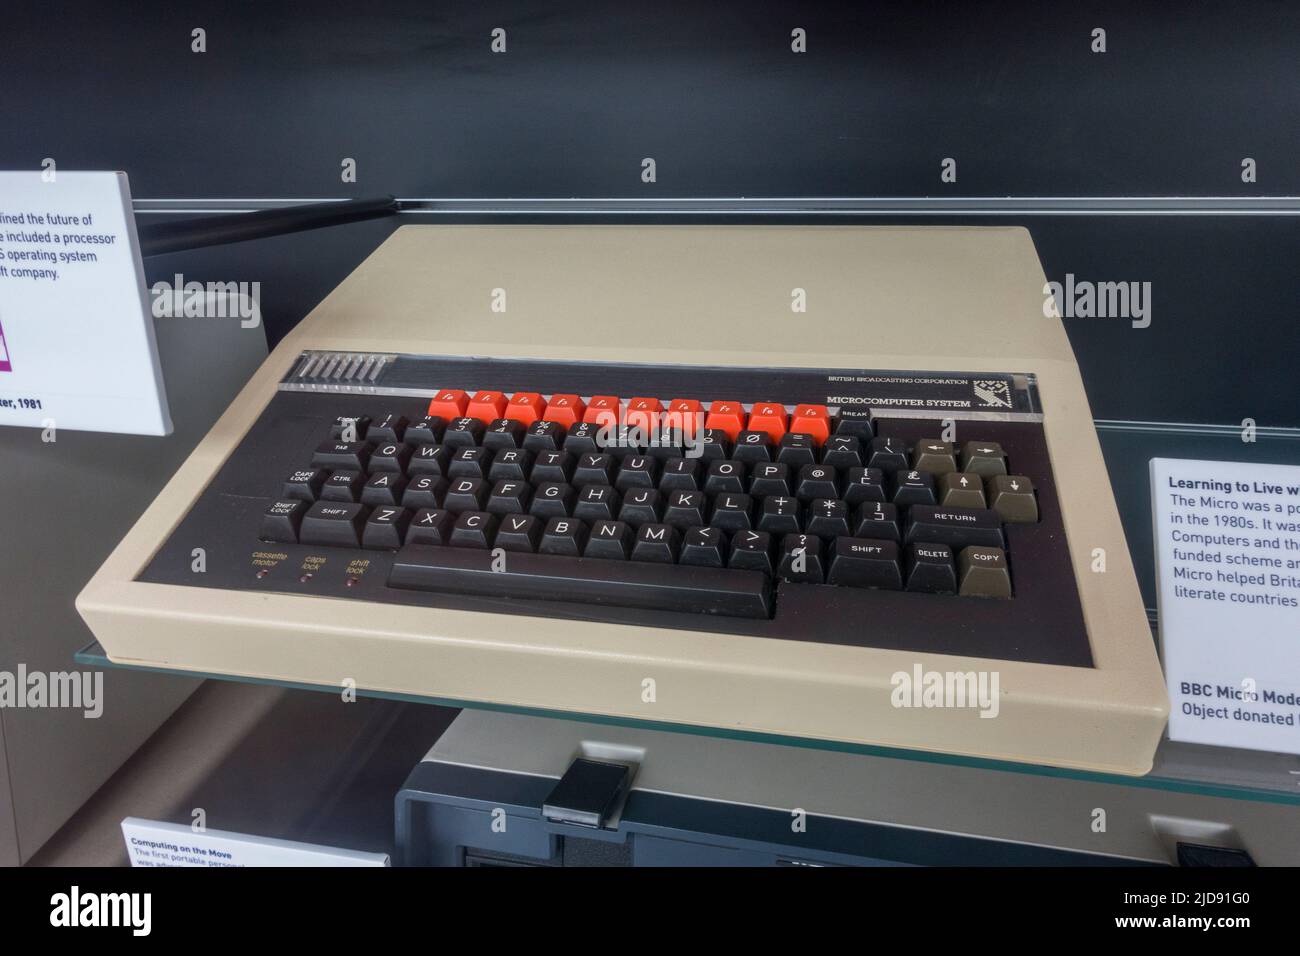 The BBC Micro Model B computer (1982) produced in partnership with Acorn Computers, on display in a media museum. Stock Photo